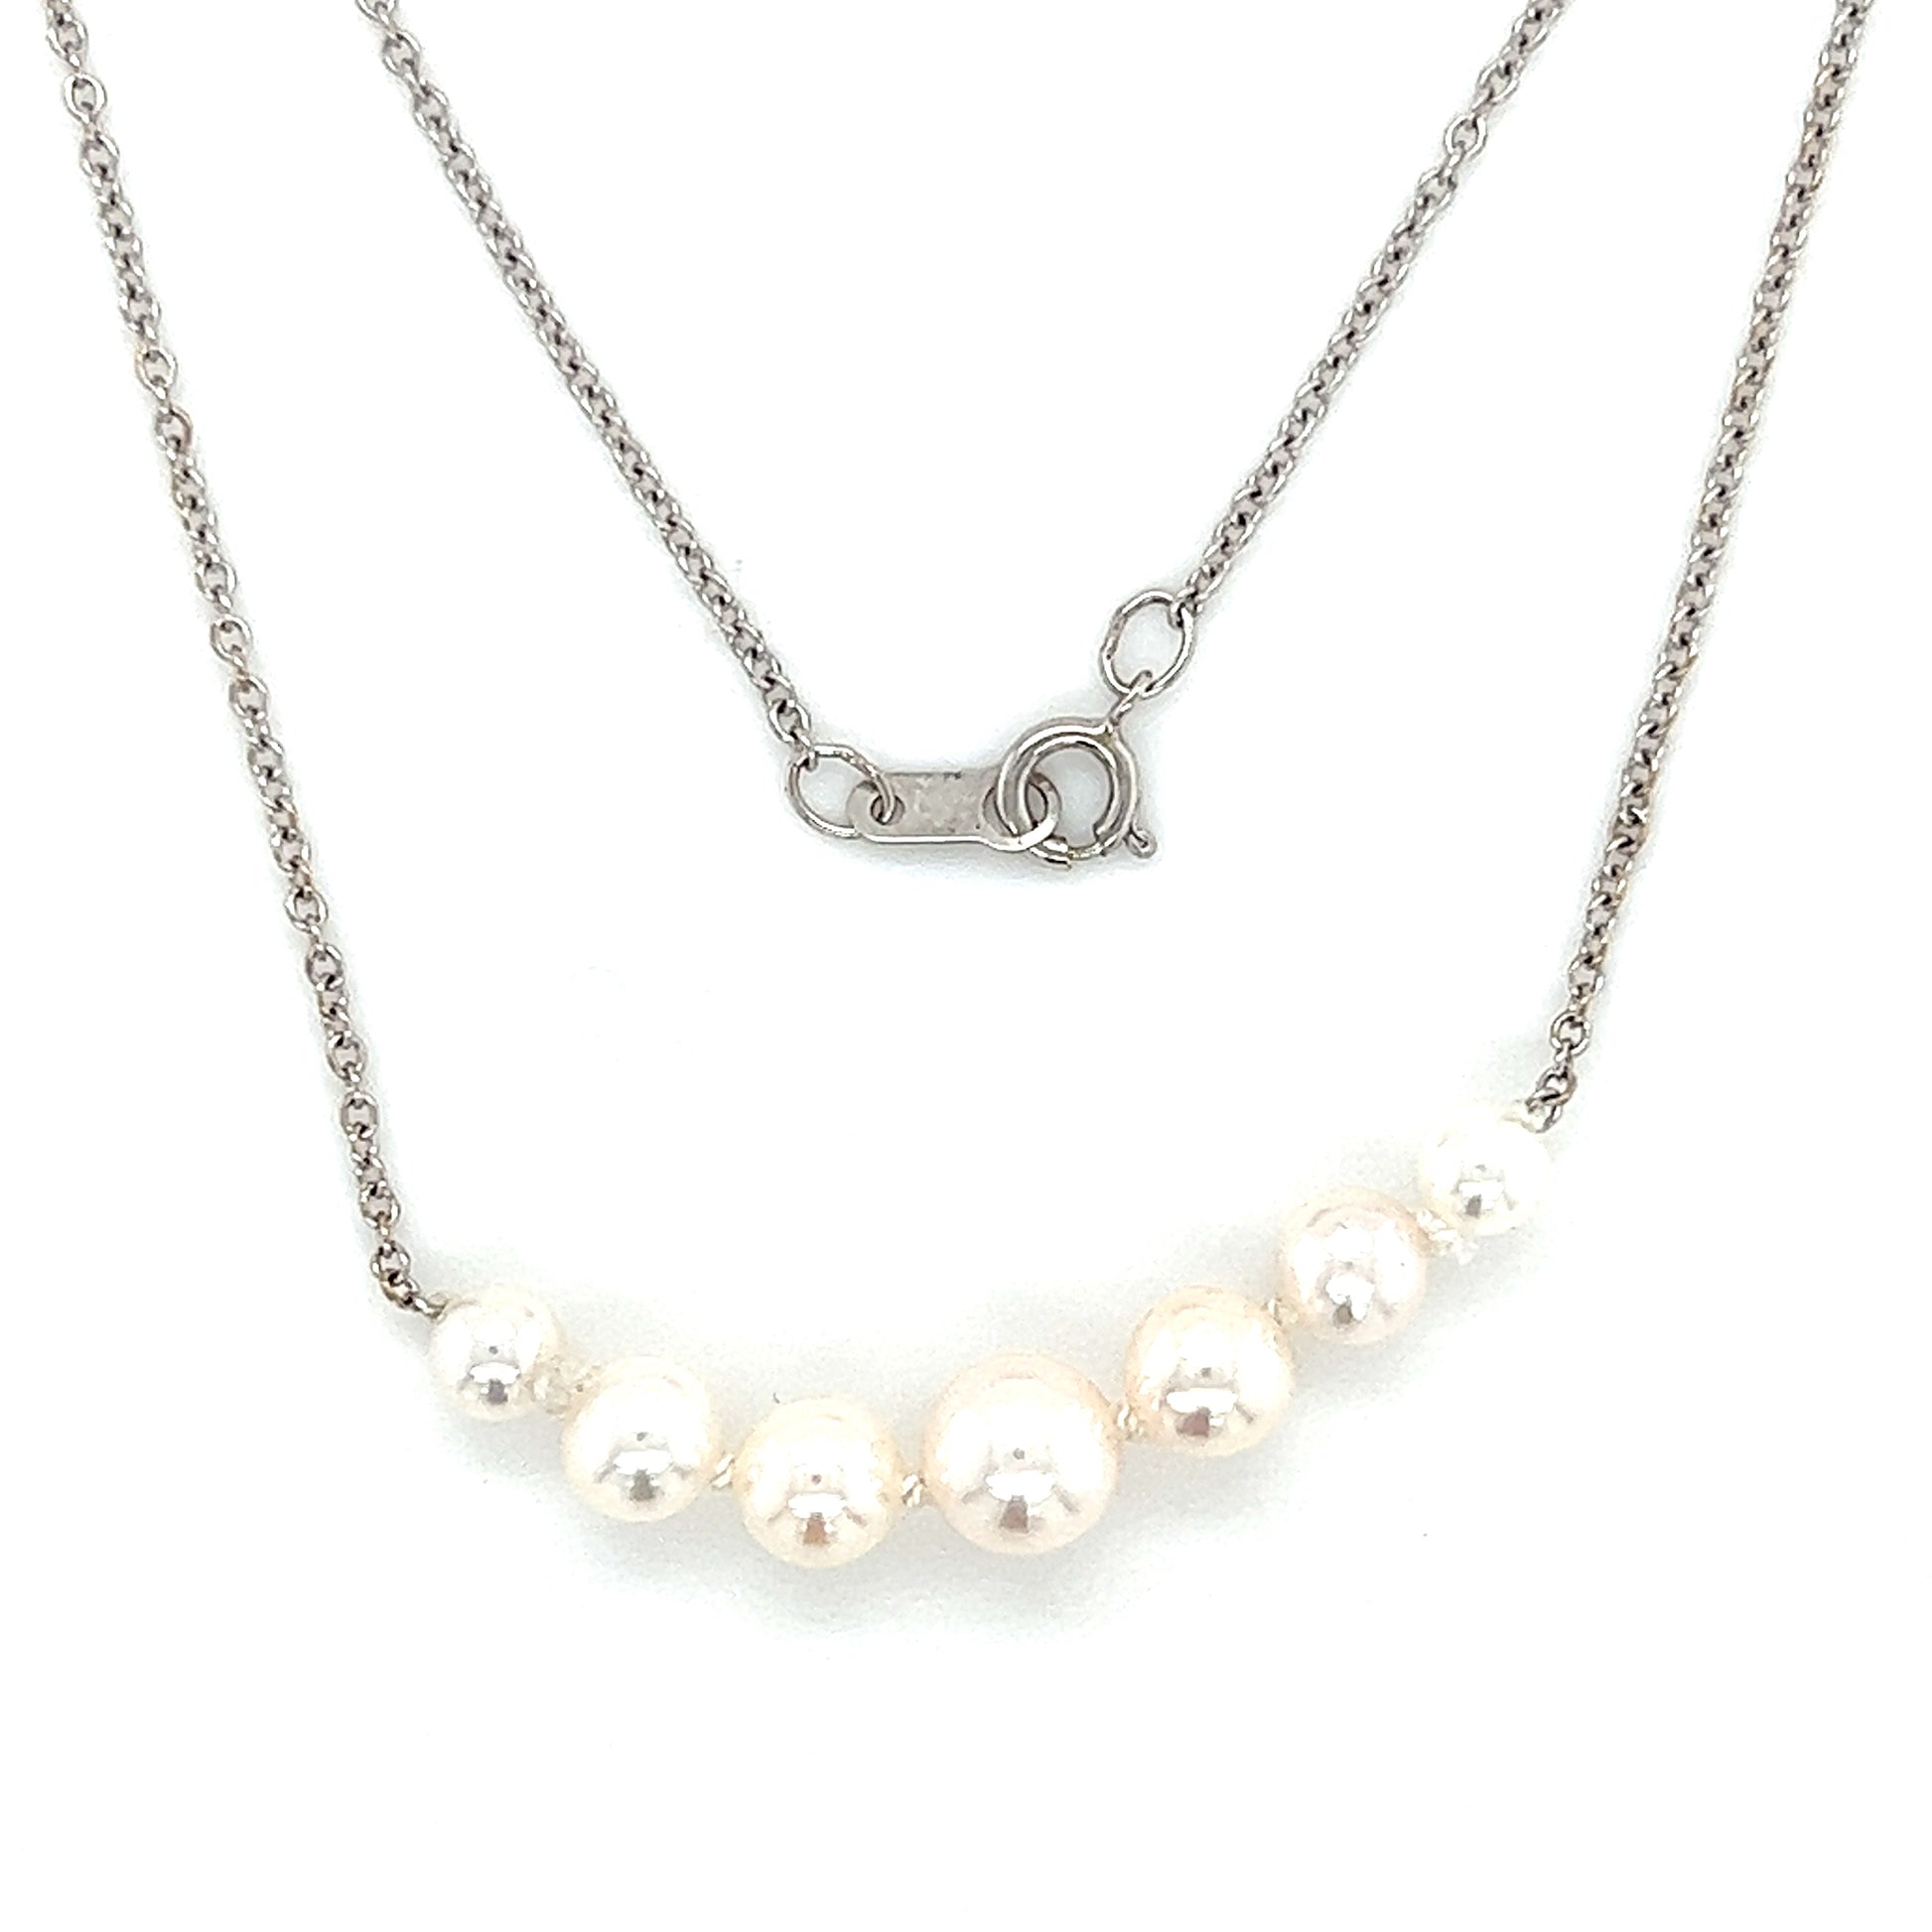 Add-A-Pearl Necklace with Seven White Pearls in 10K White Gold. Pearls and Clasp View